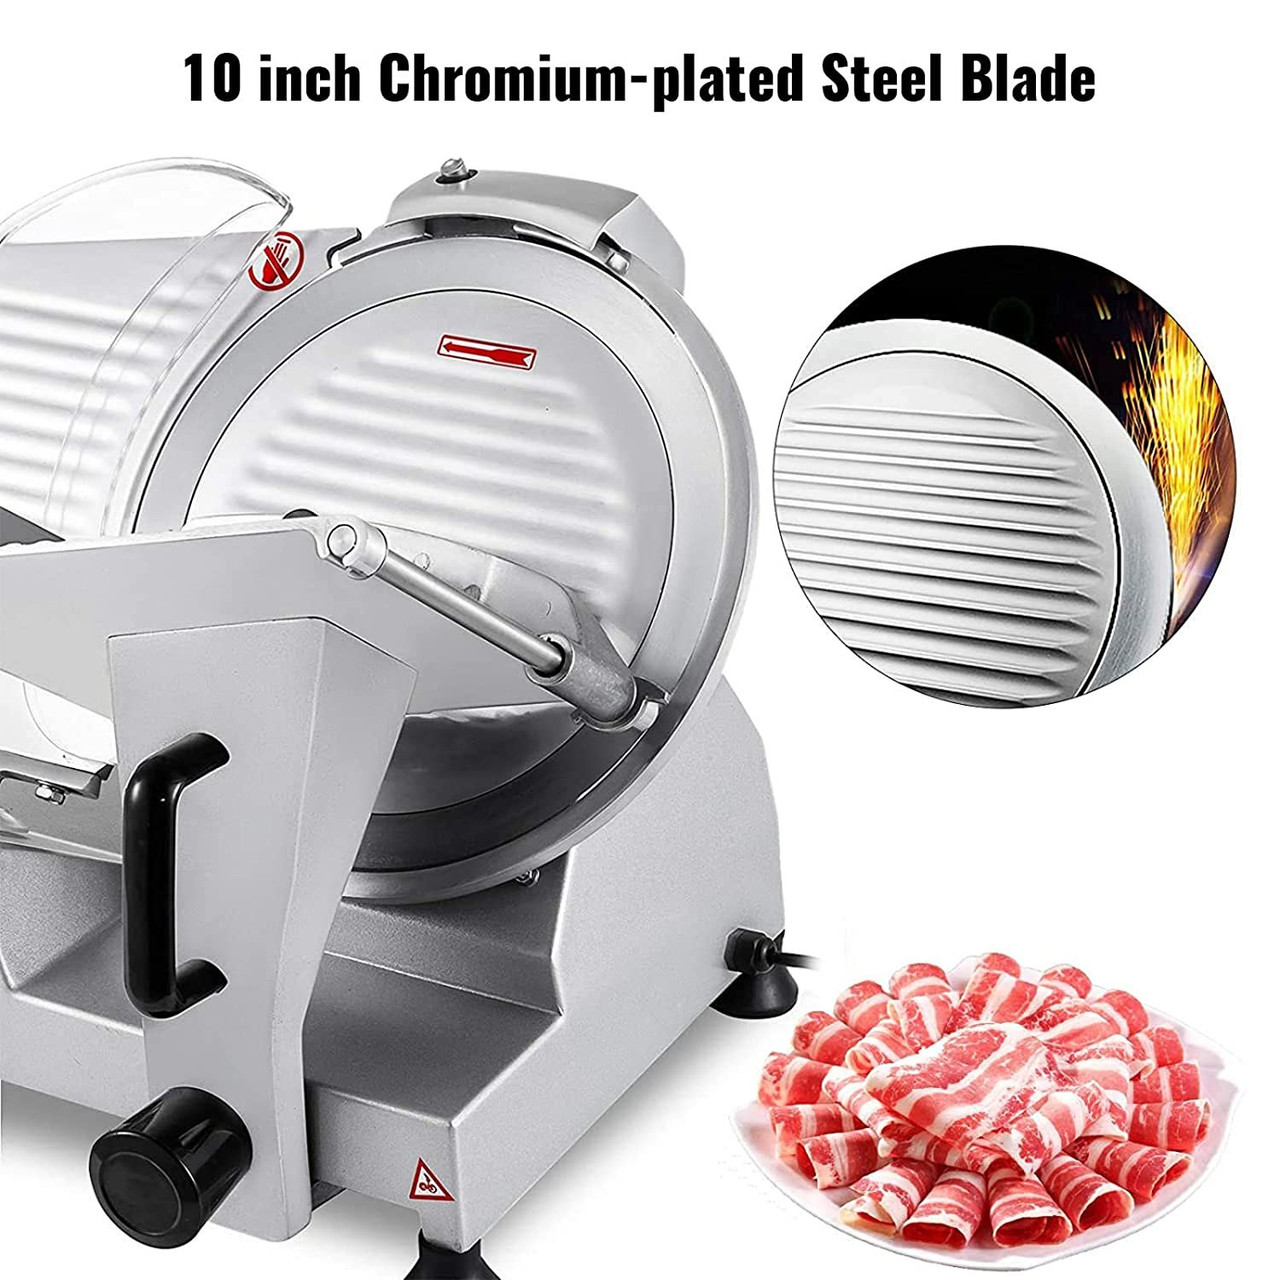 Commercial Meat Slicer, 10 inch Electric Food Slicer, 240W Frozen Meat Deli Slicer, Premium Chromium-plated Steel Blade Semi-Auto Meat Slicer For Commercial and Home use